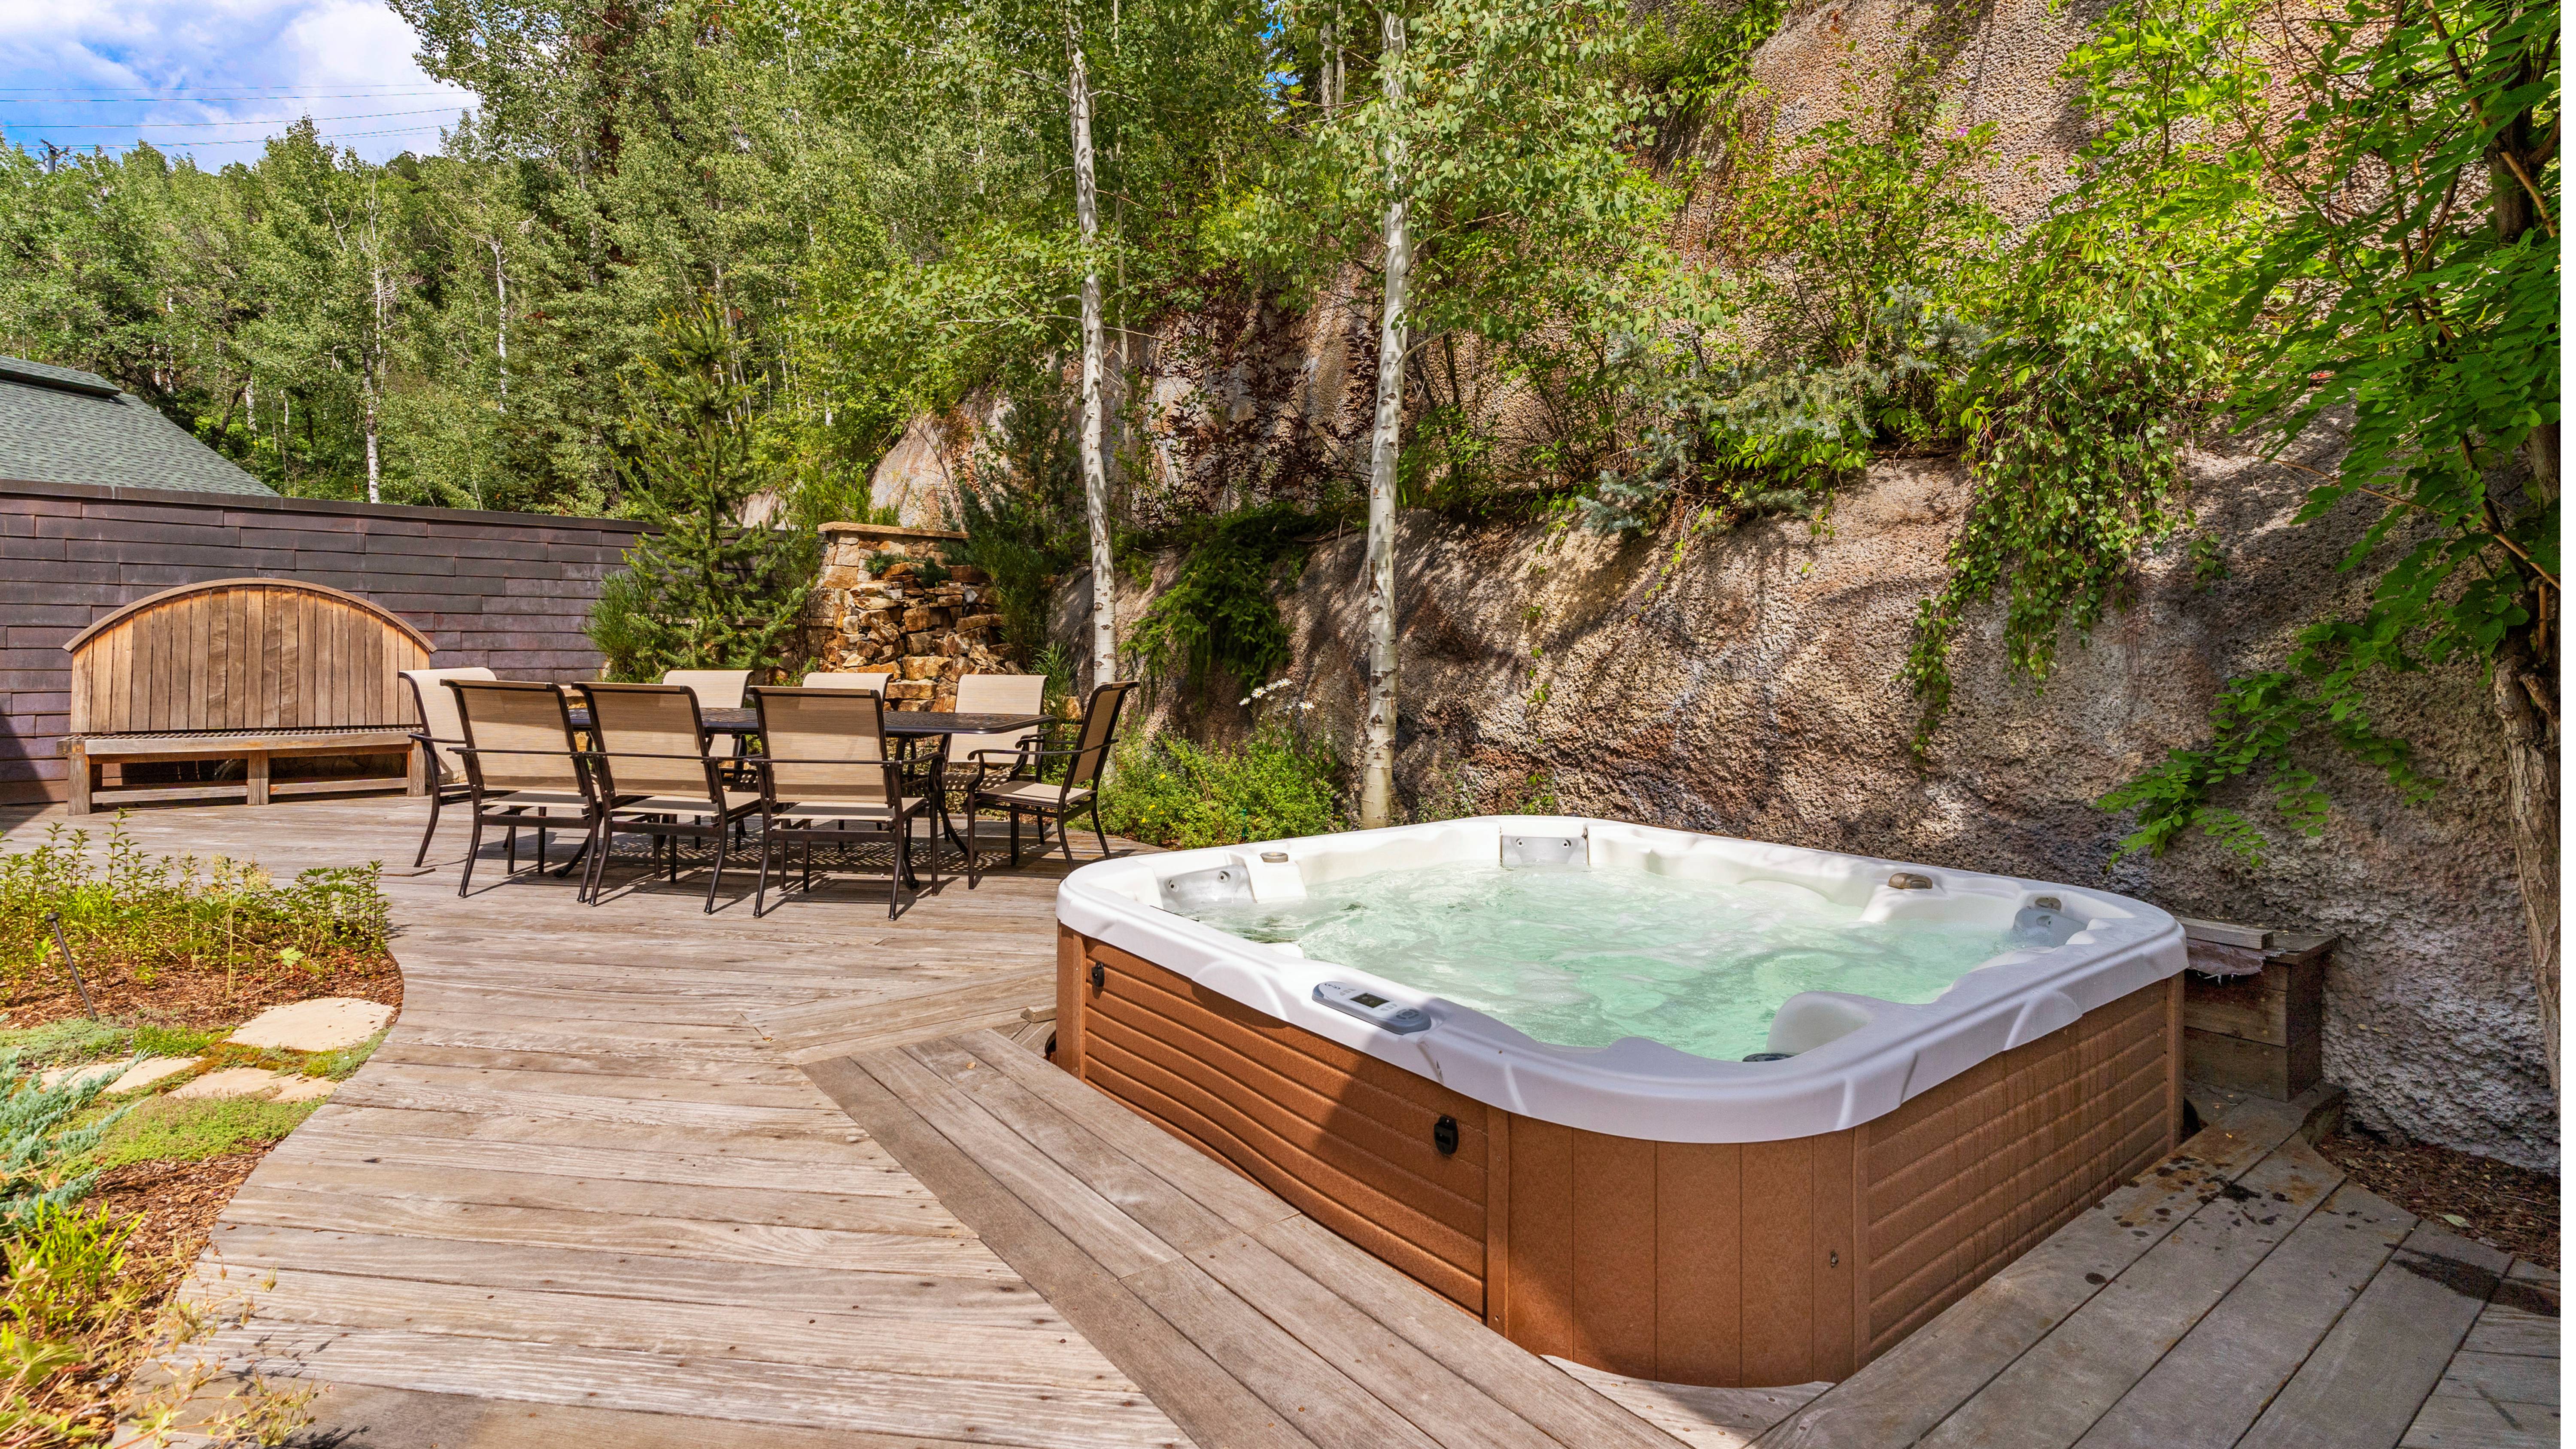 Private hot tub and patio dining area in summer